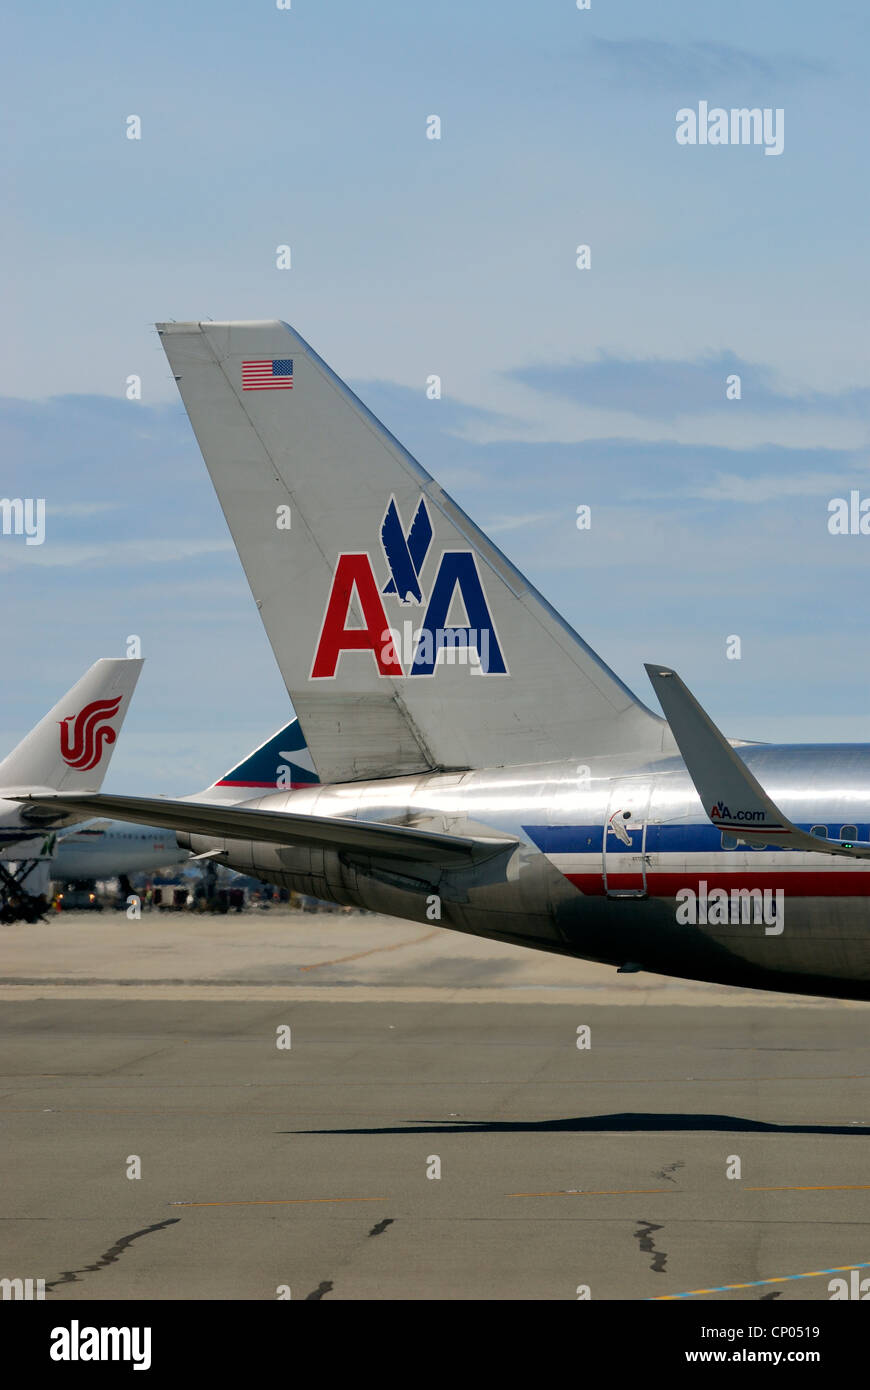 American Airlines logo on the tail of a Boeing 757 Stock Photo